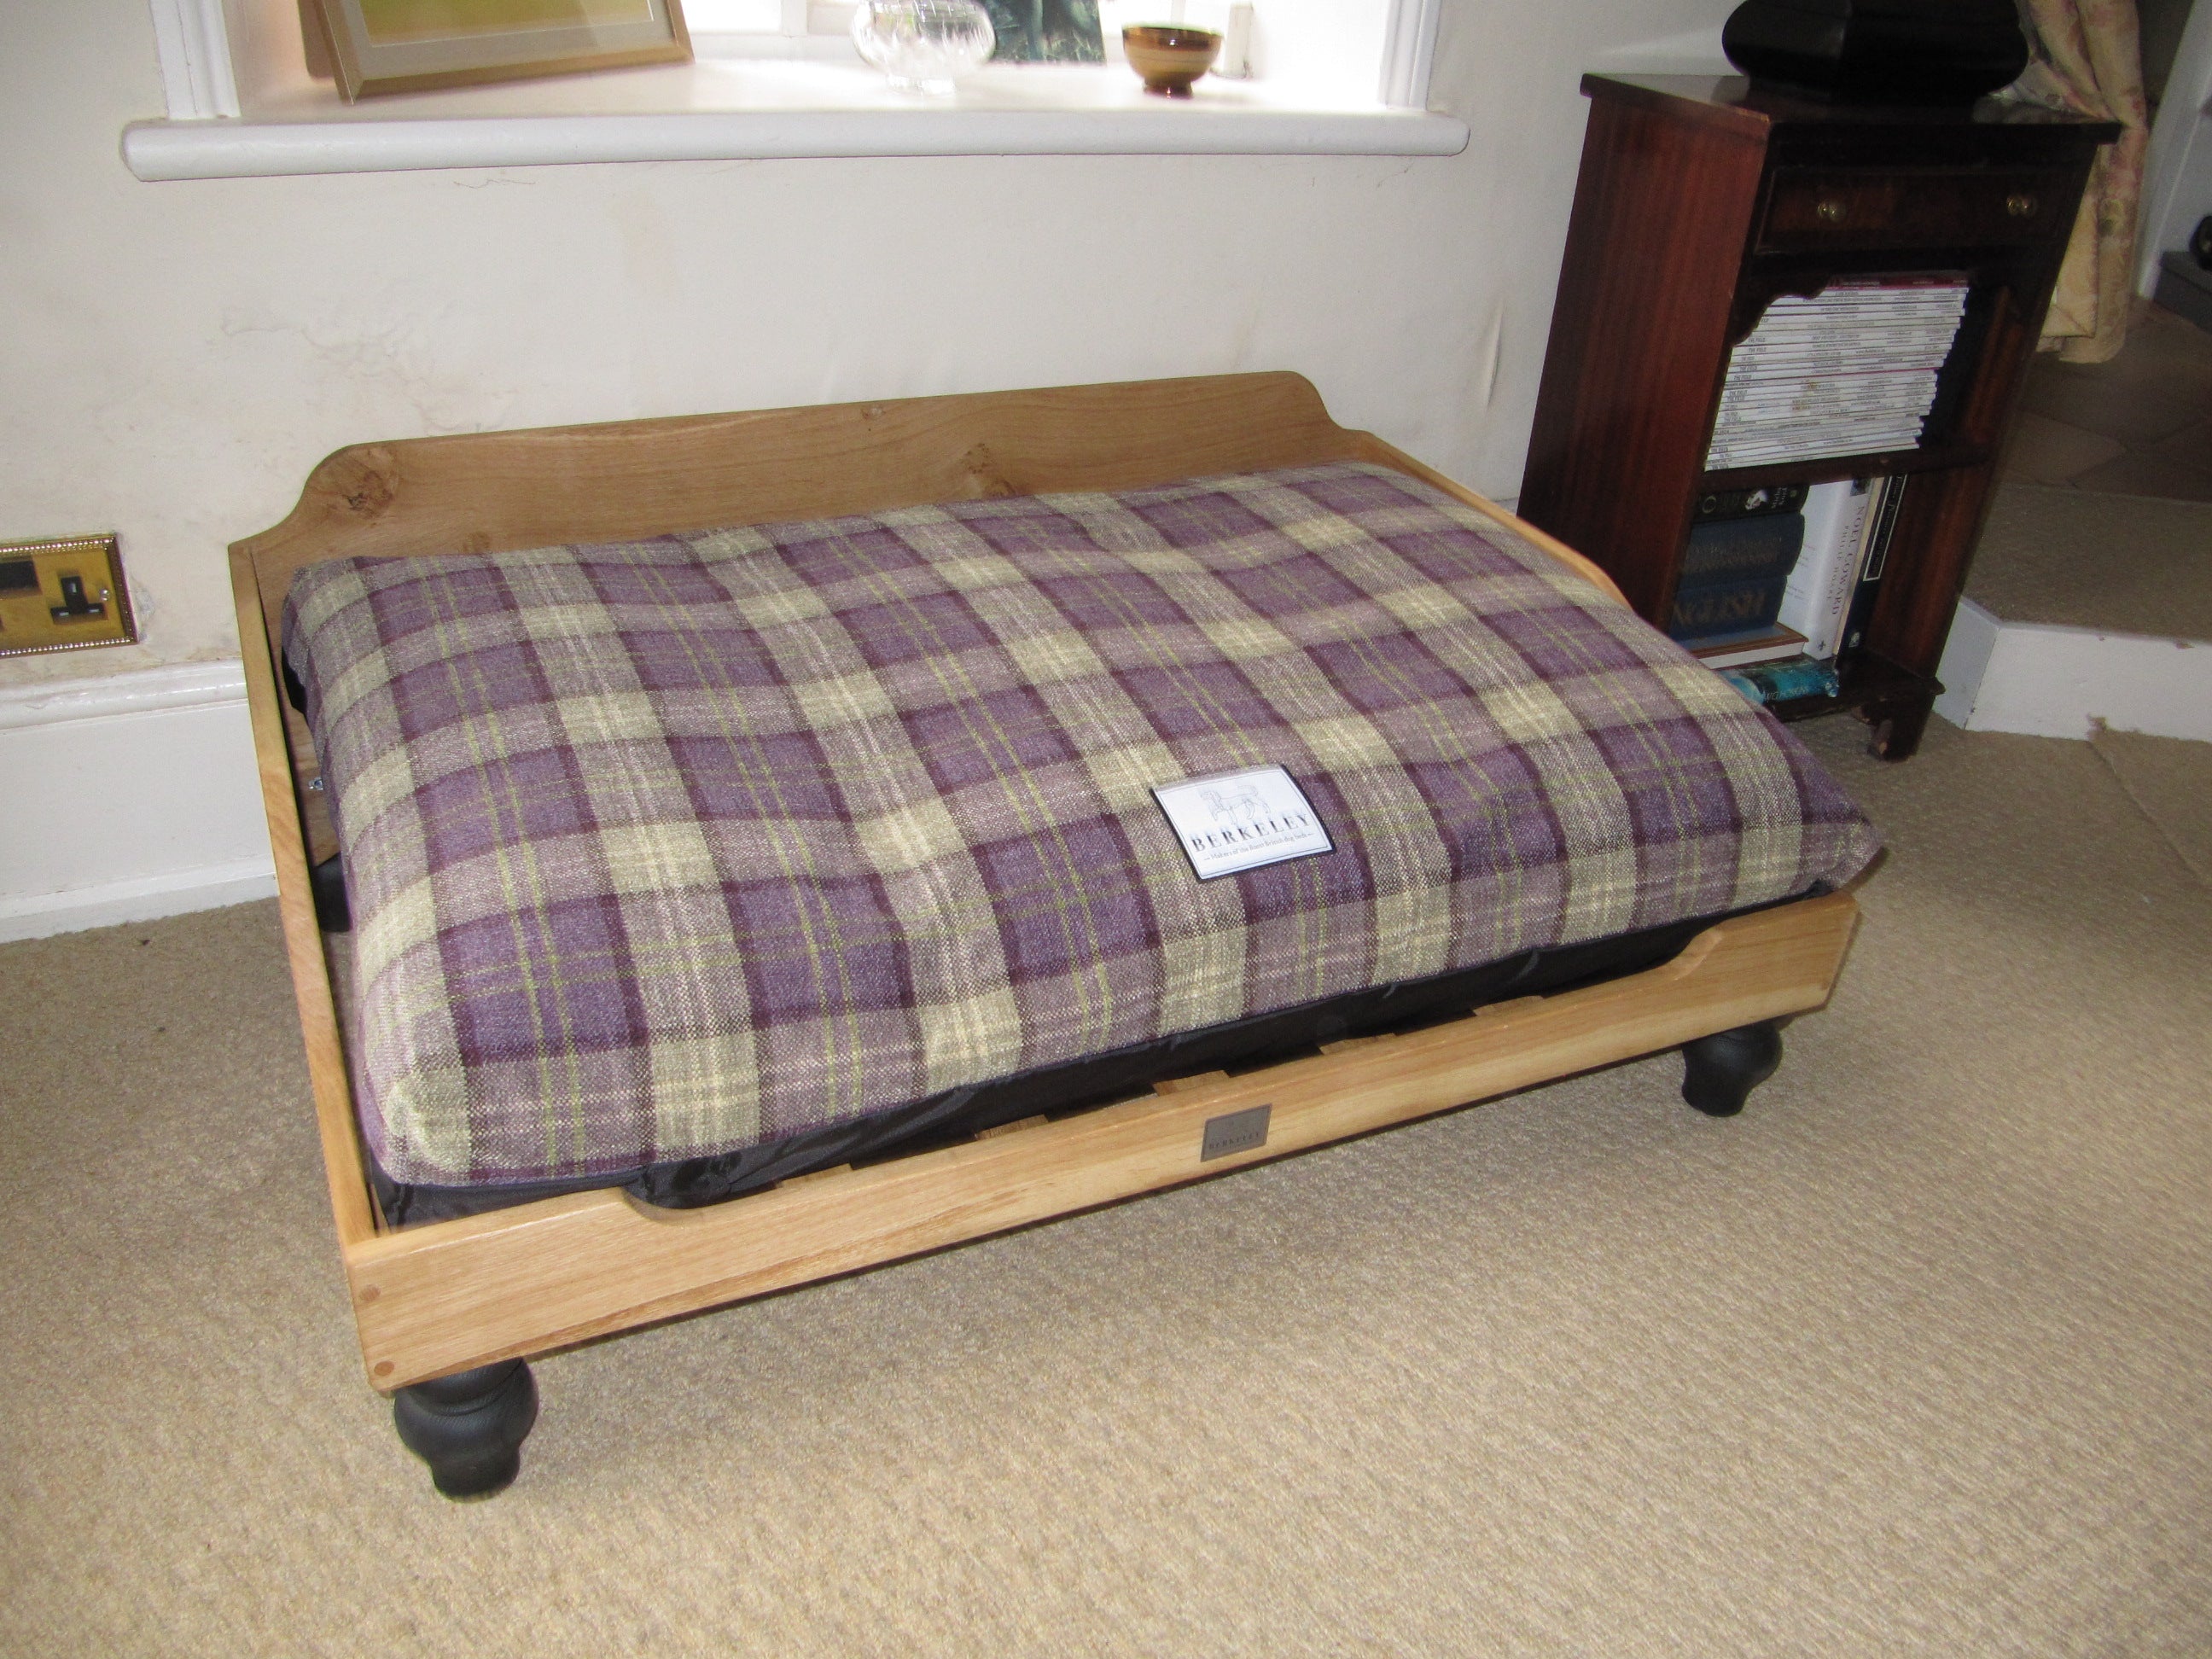 Luxury Dog Bed with Heather Tartan Fabric Cover